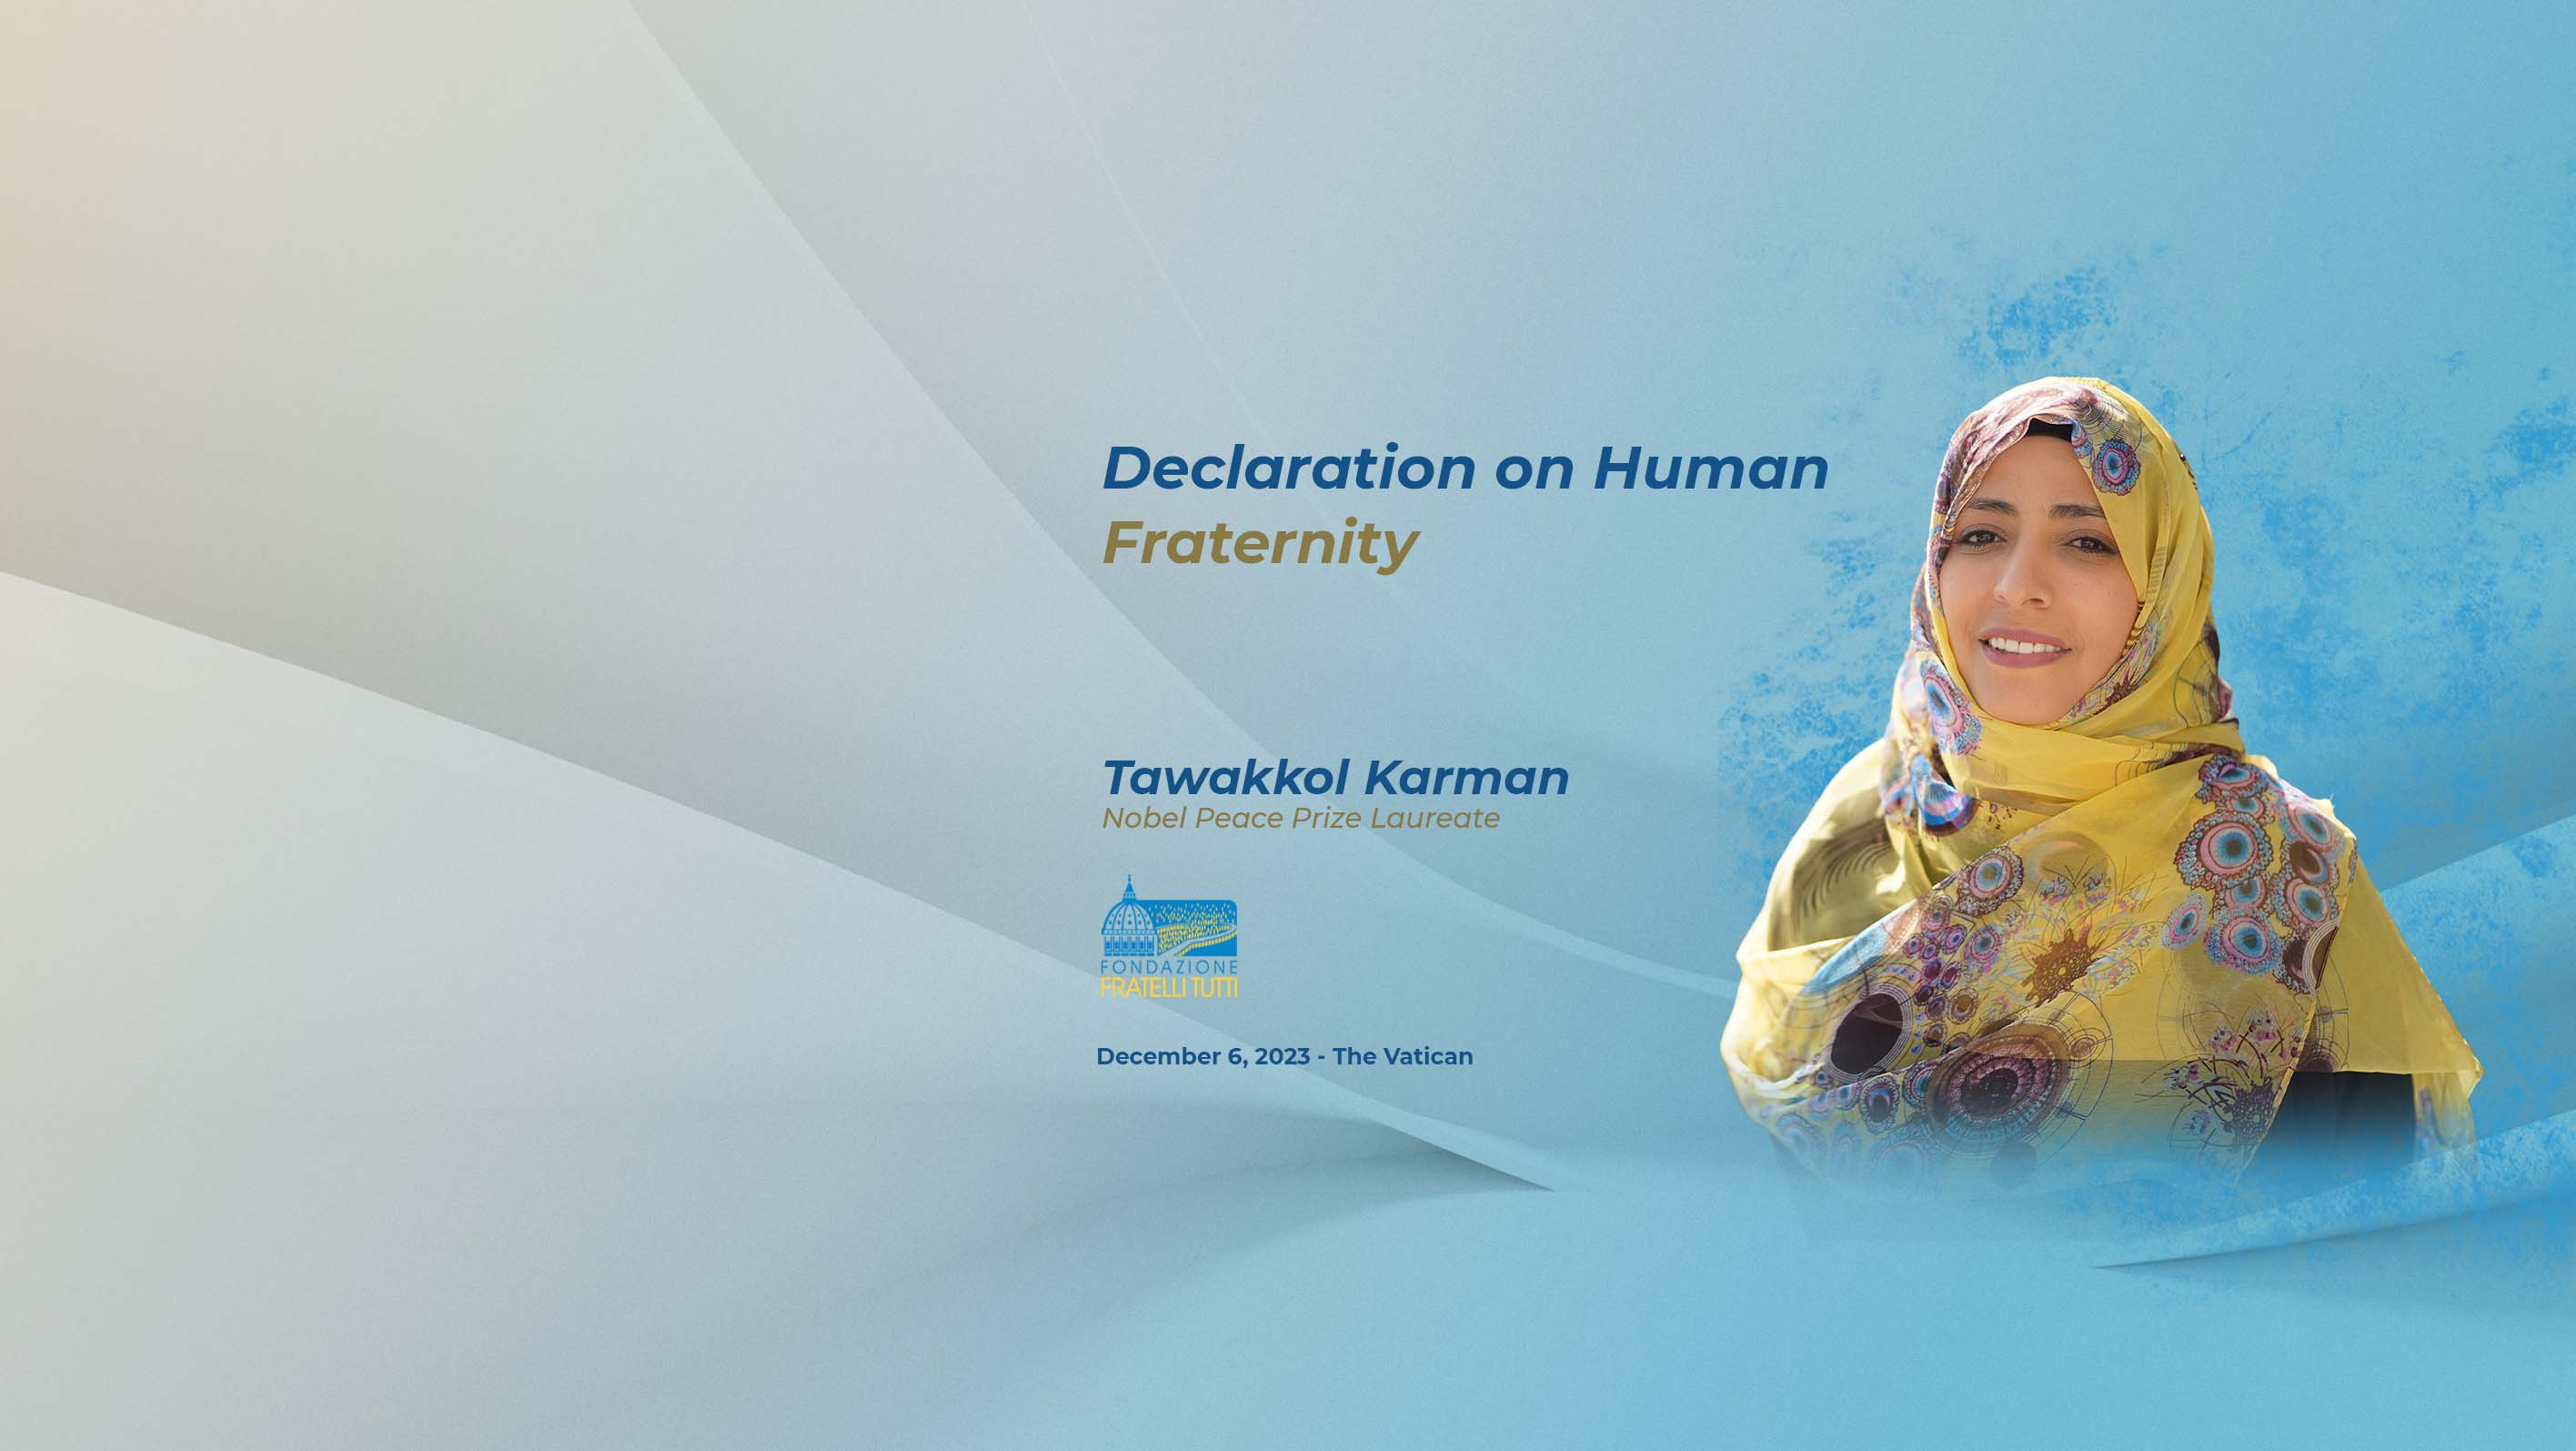 Declaration on Human Fraternity to be presented at papal general audience: Tawakkol Karman's involvement